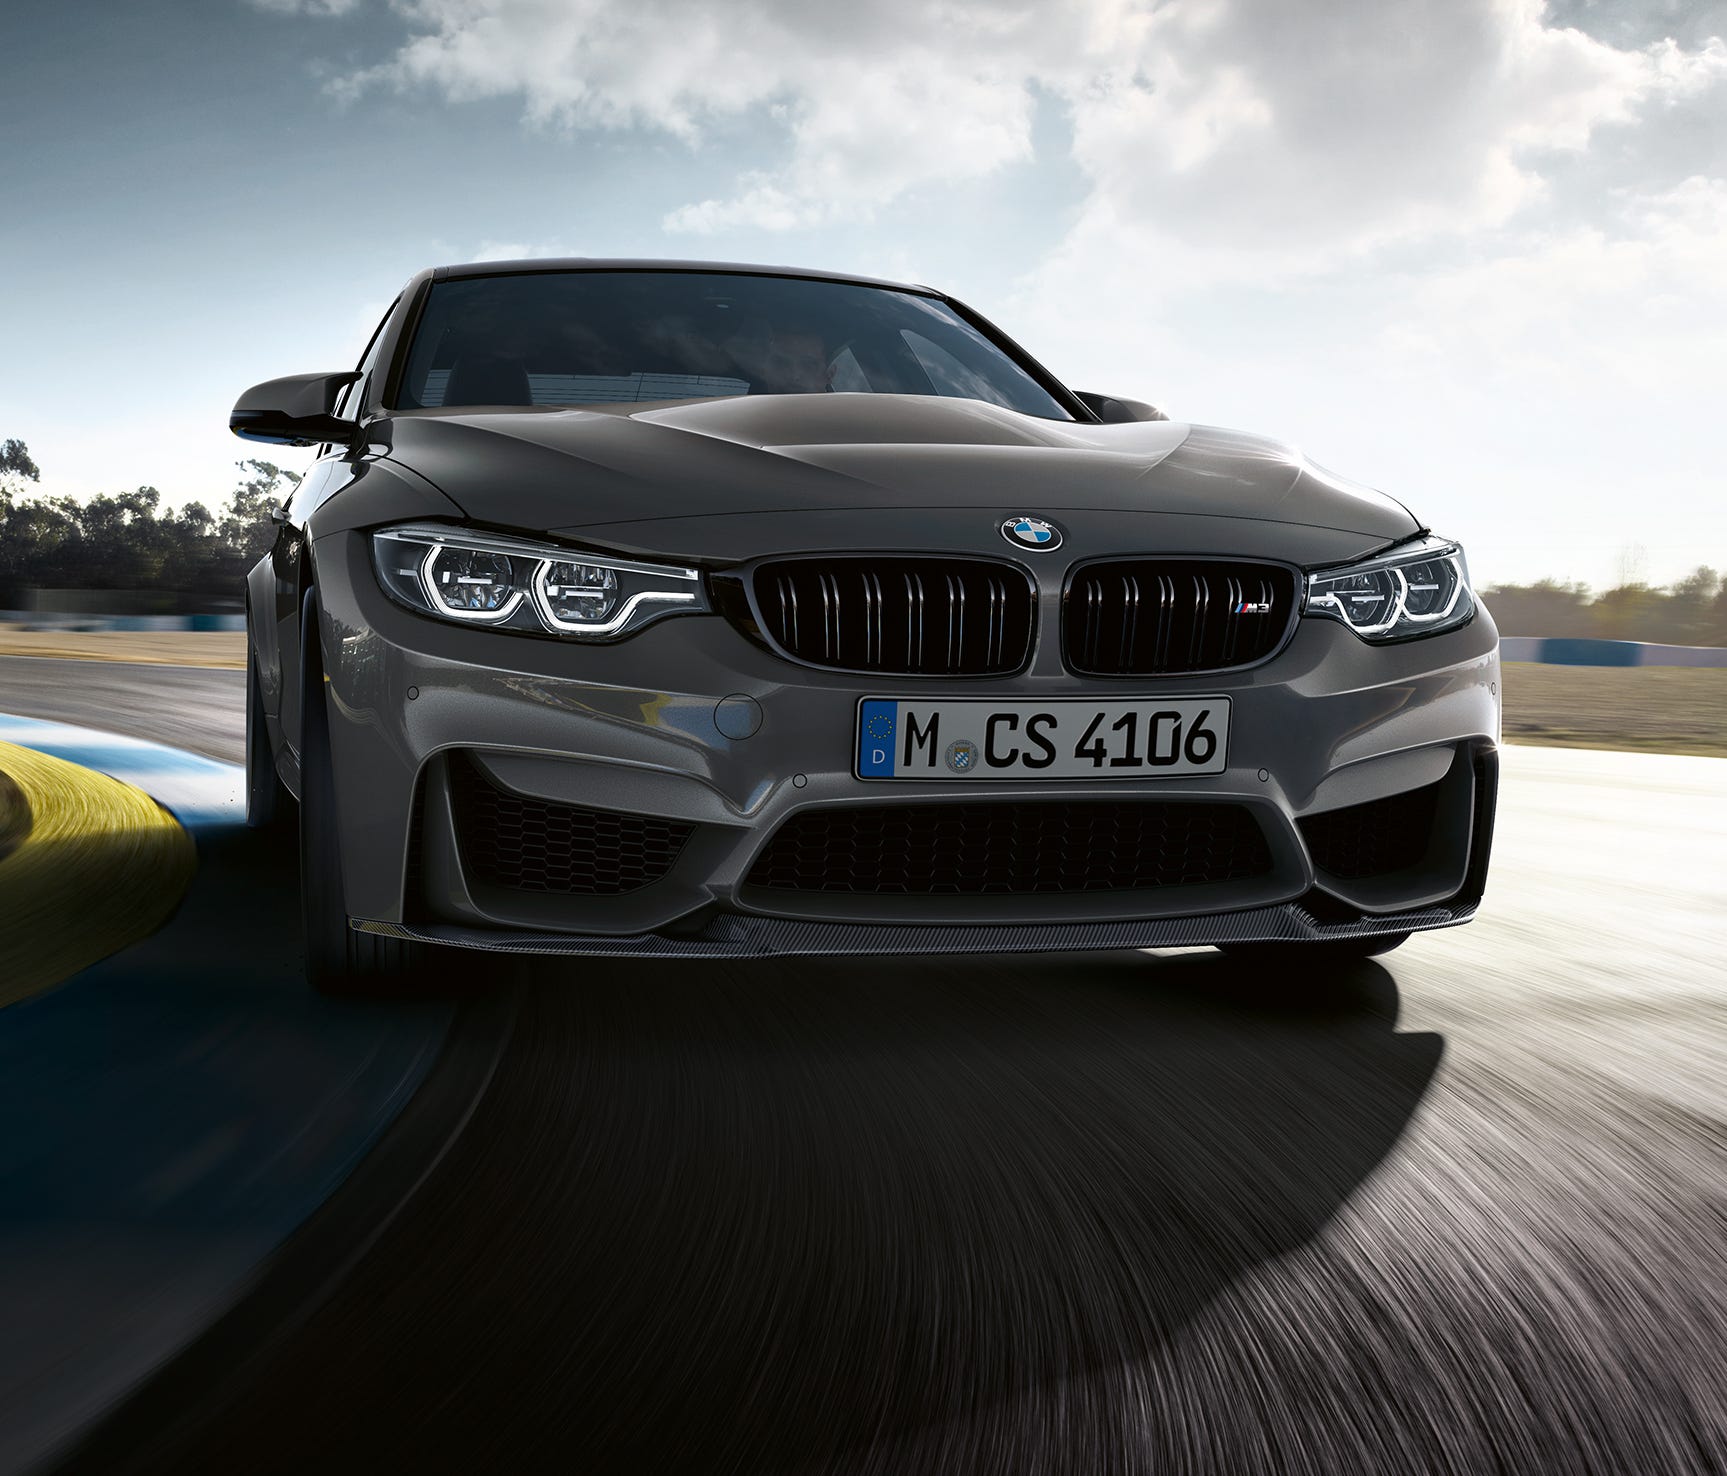 BMW says its new M3 CS is at home on the street or the track